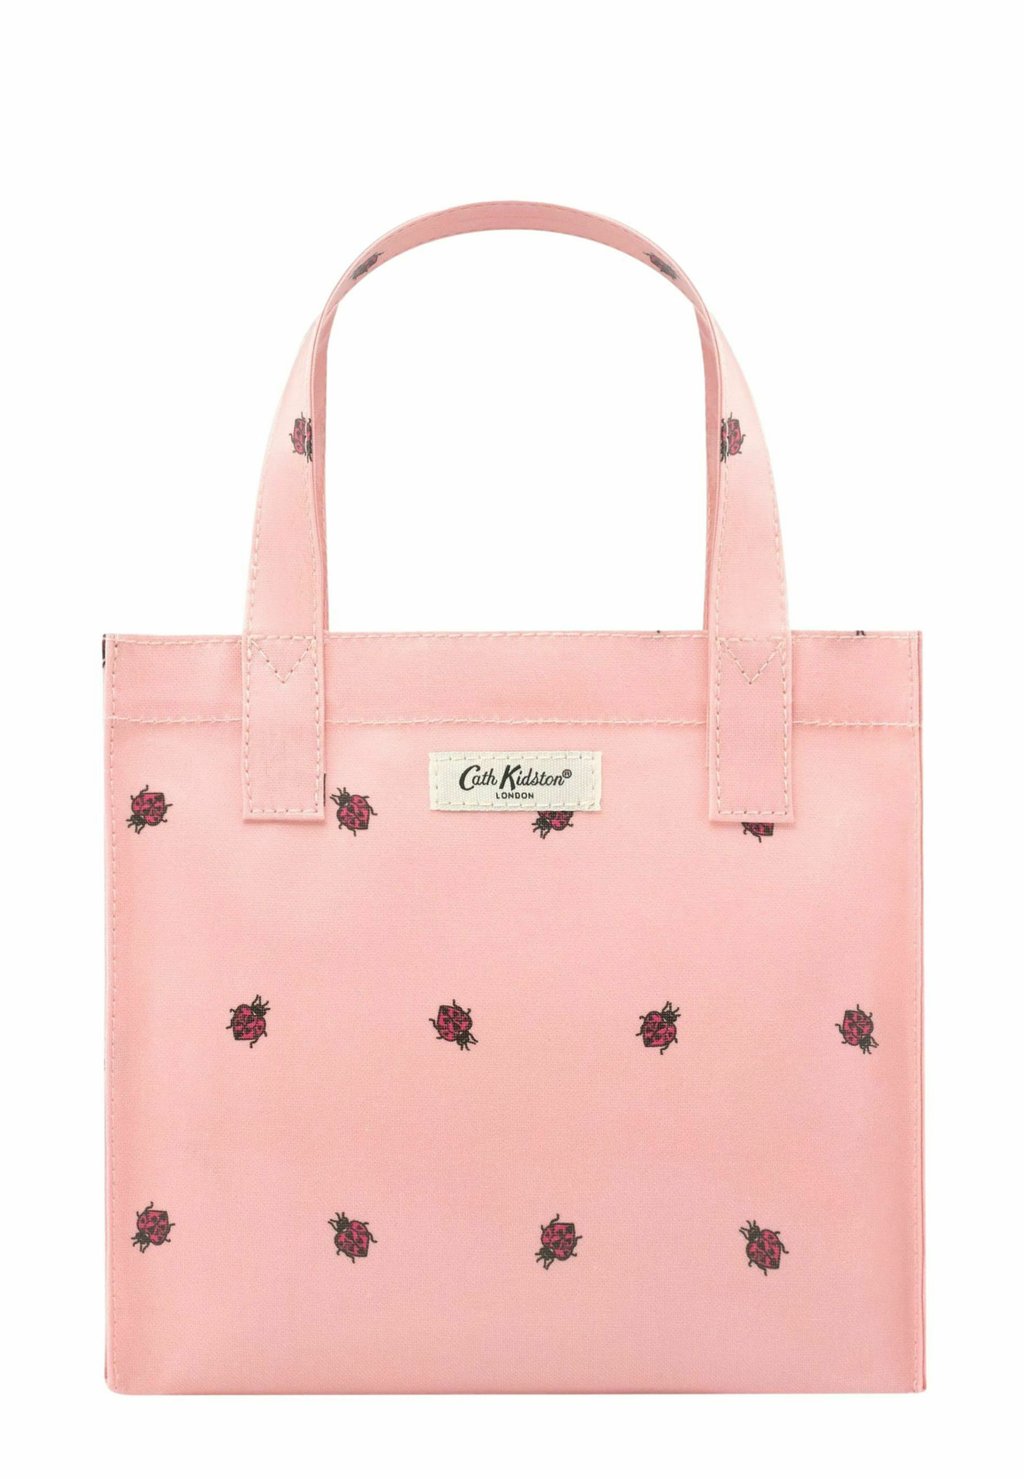 Сумочка Small Coated Regular Fit Cath Kidston, цвет pink ladybird print kidston cath a place called home print colour pattern